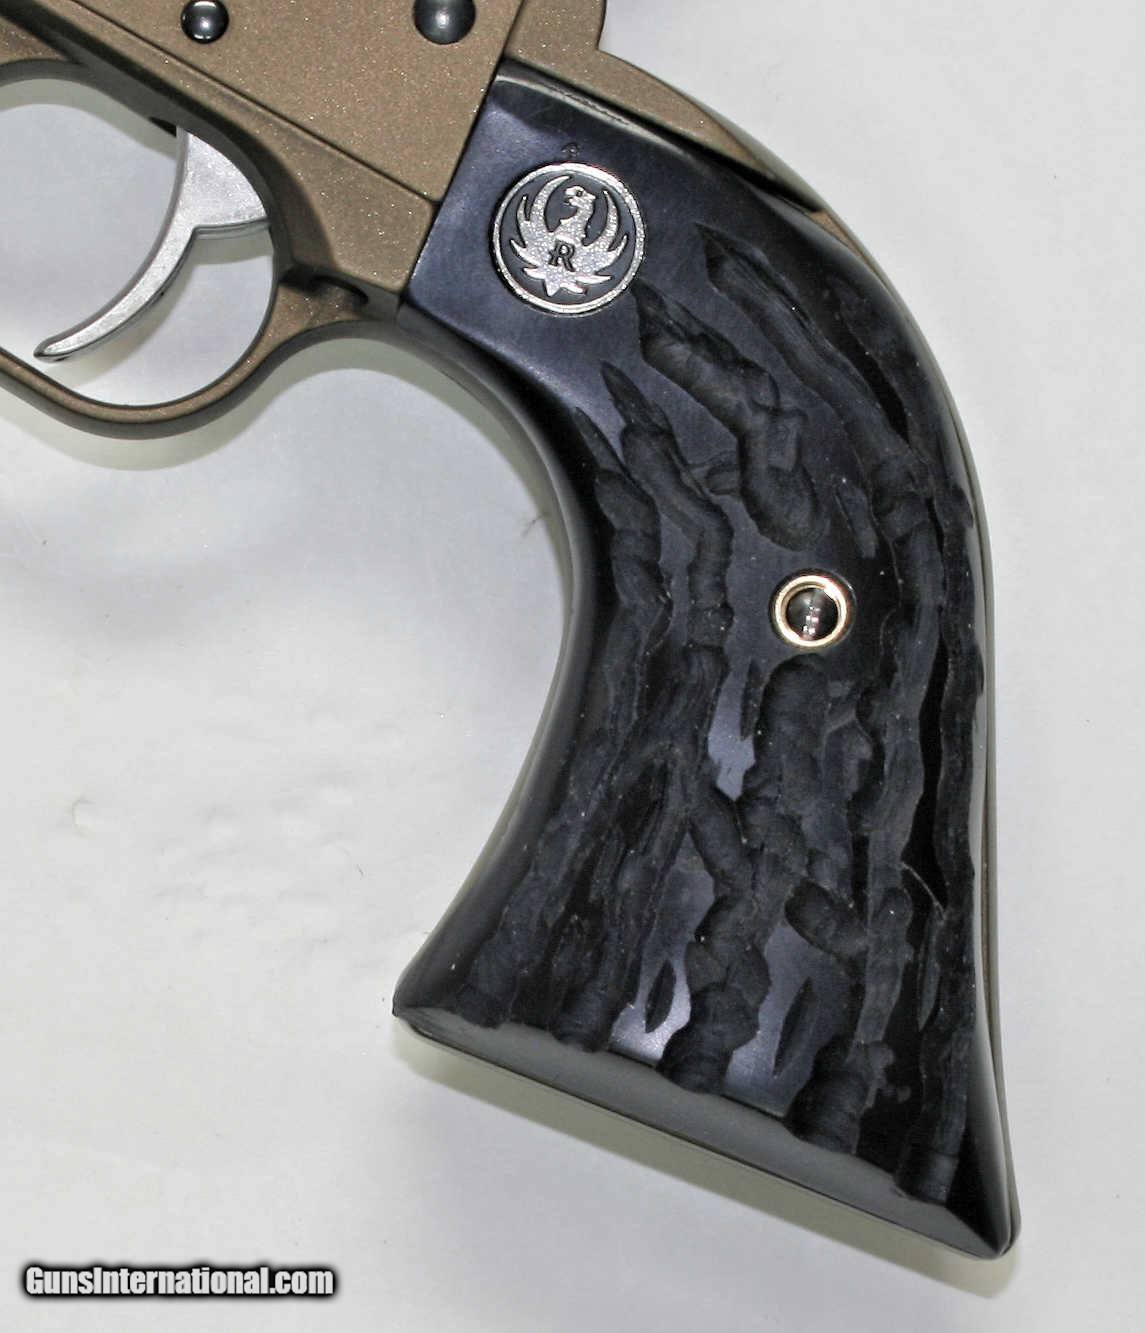 Ruger Wrangler Imitation Buffalo Horn Grips With Medallions for sale